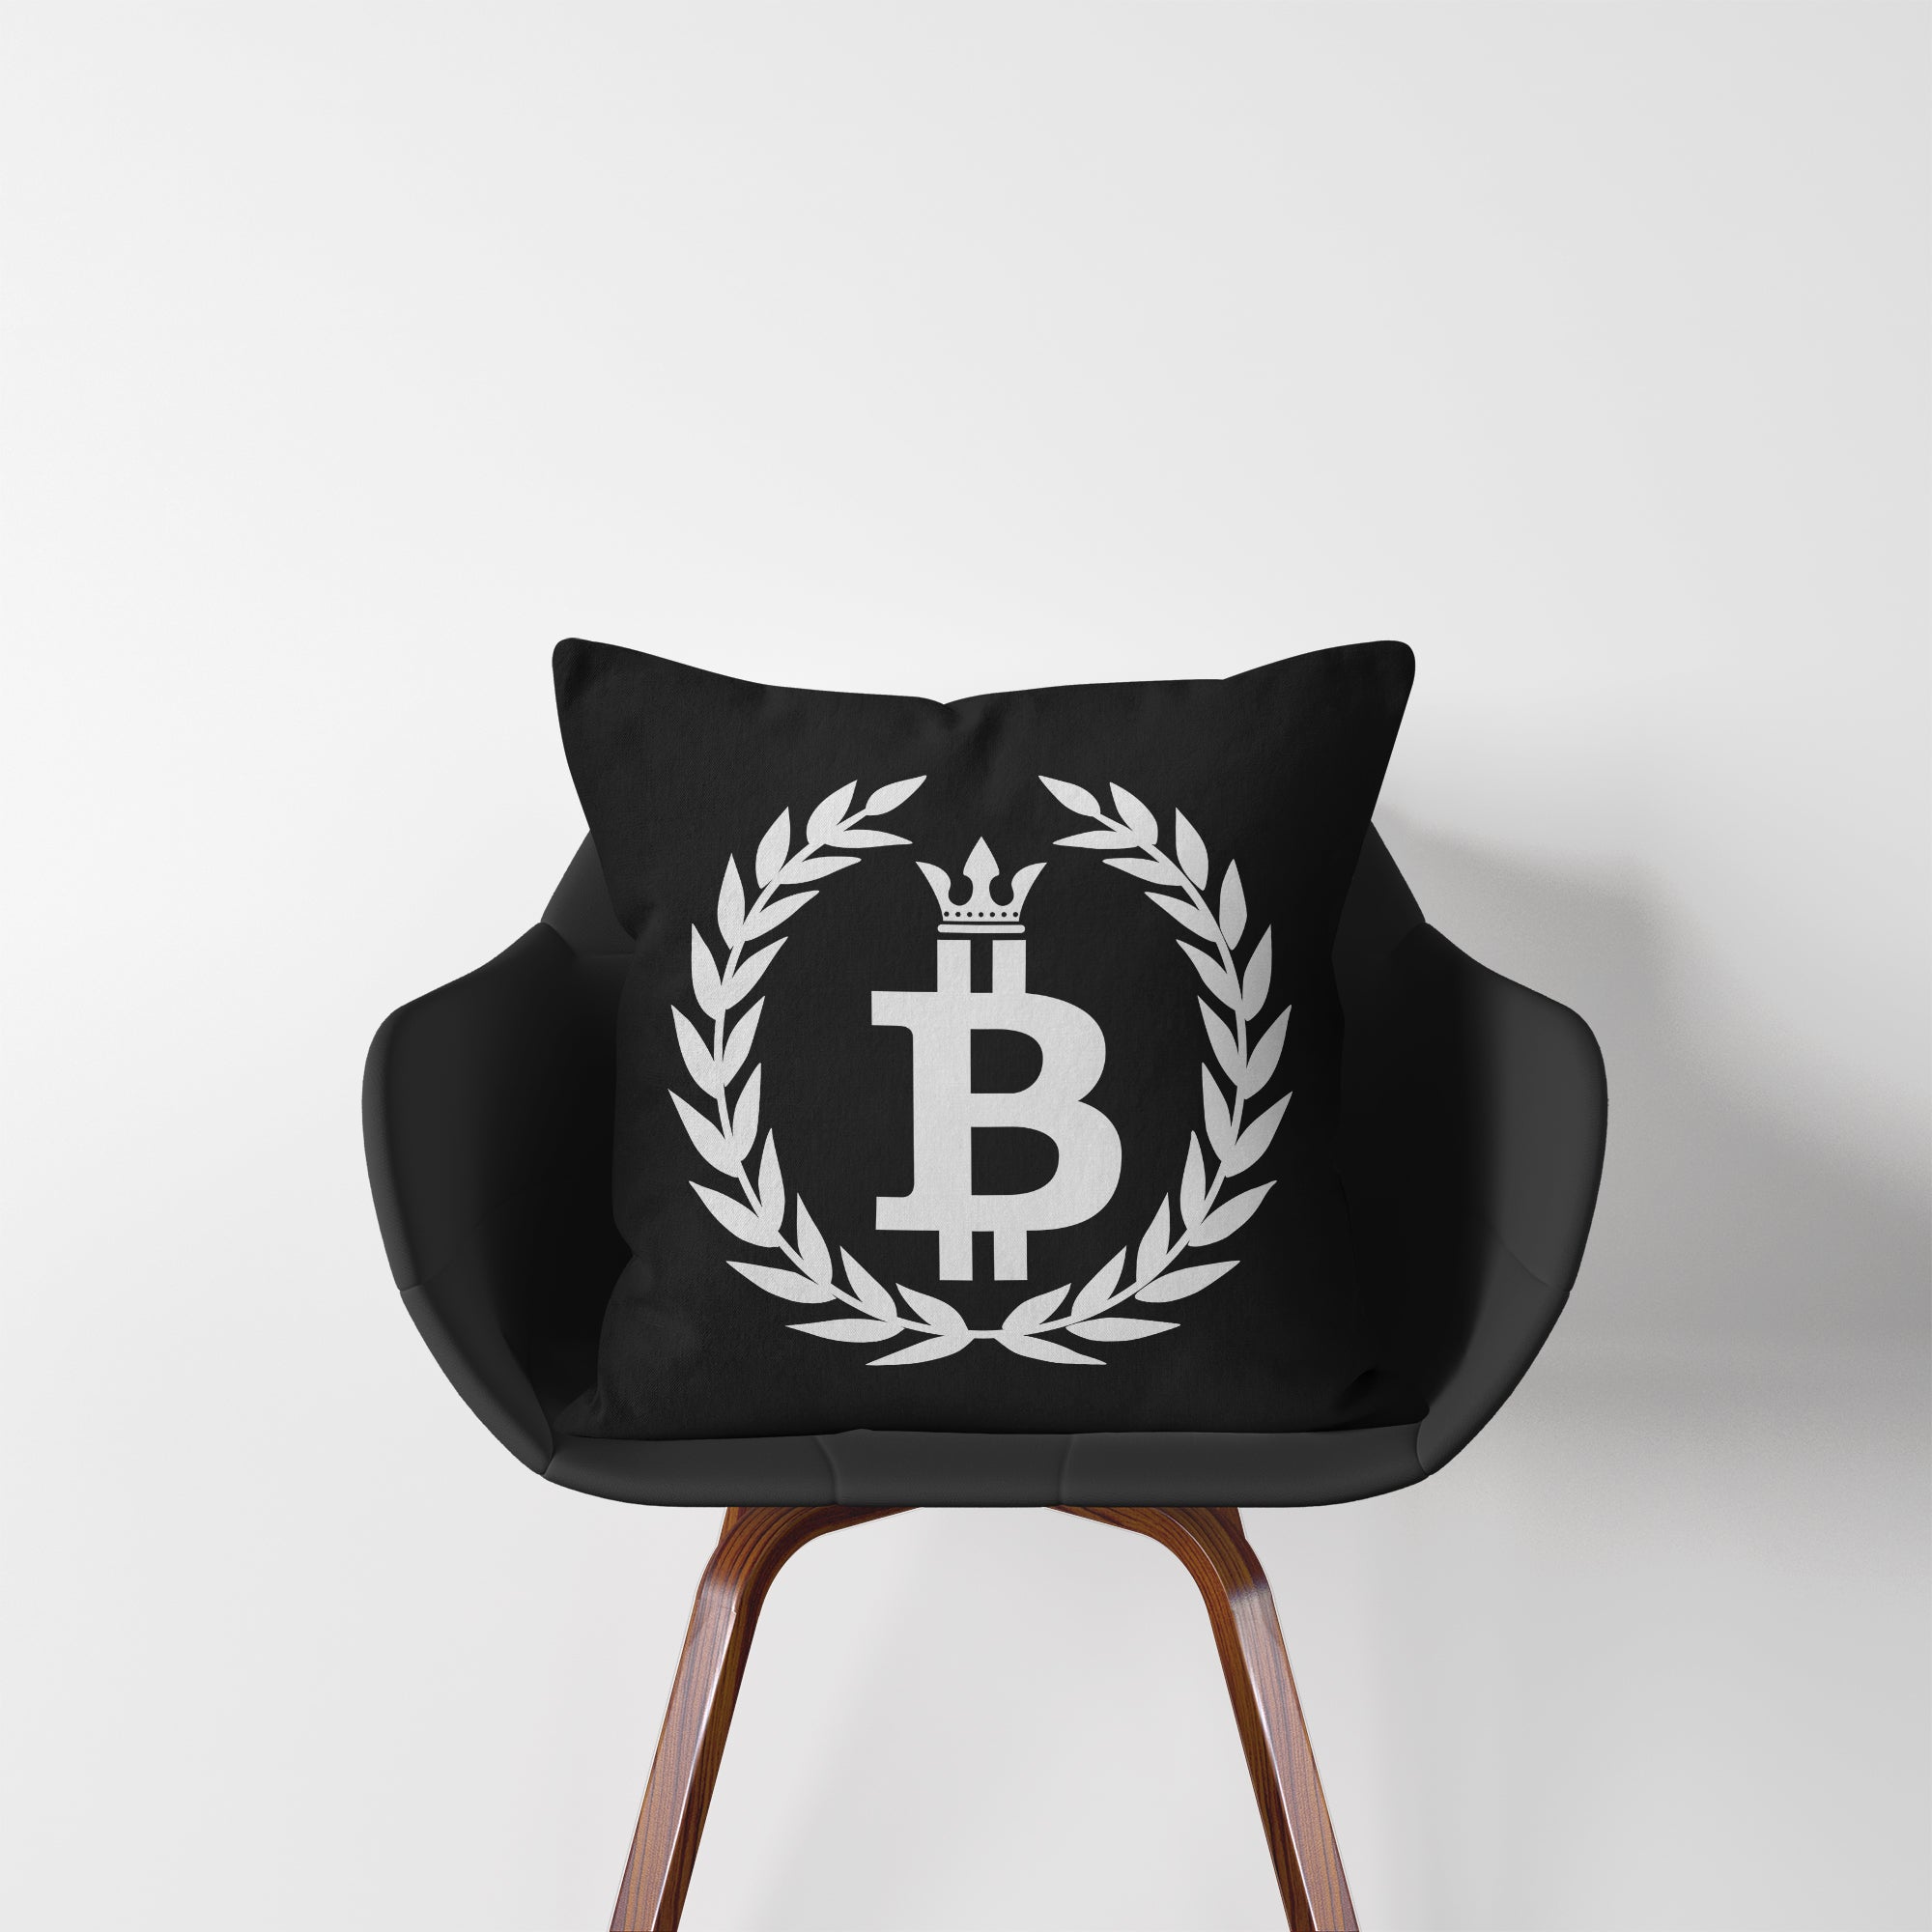 Bitcoin Merchandise - Bitcoin Dominance Pillow displayed on a chair.